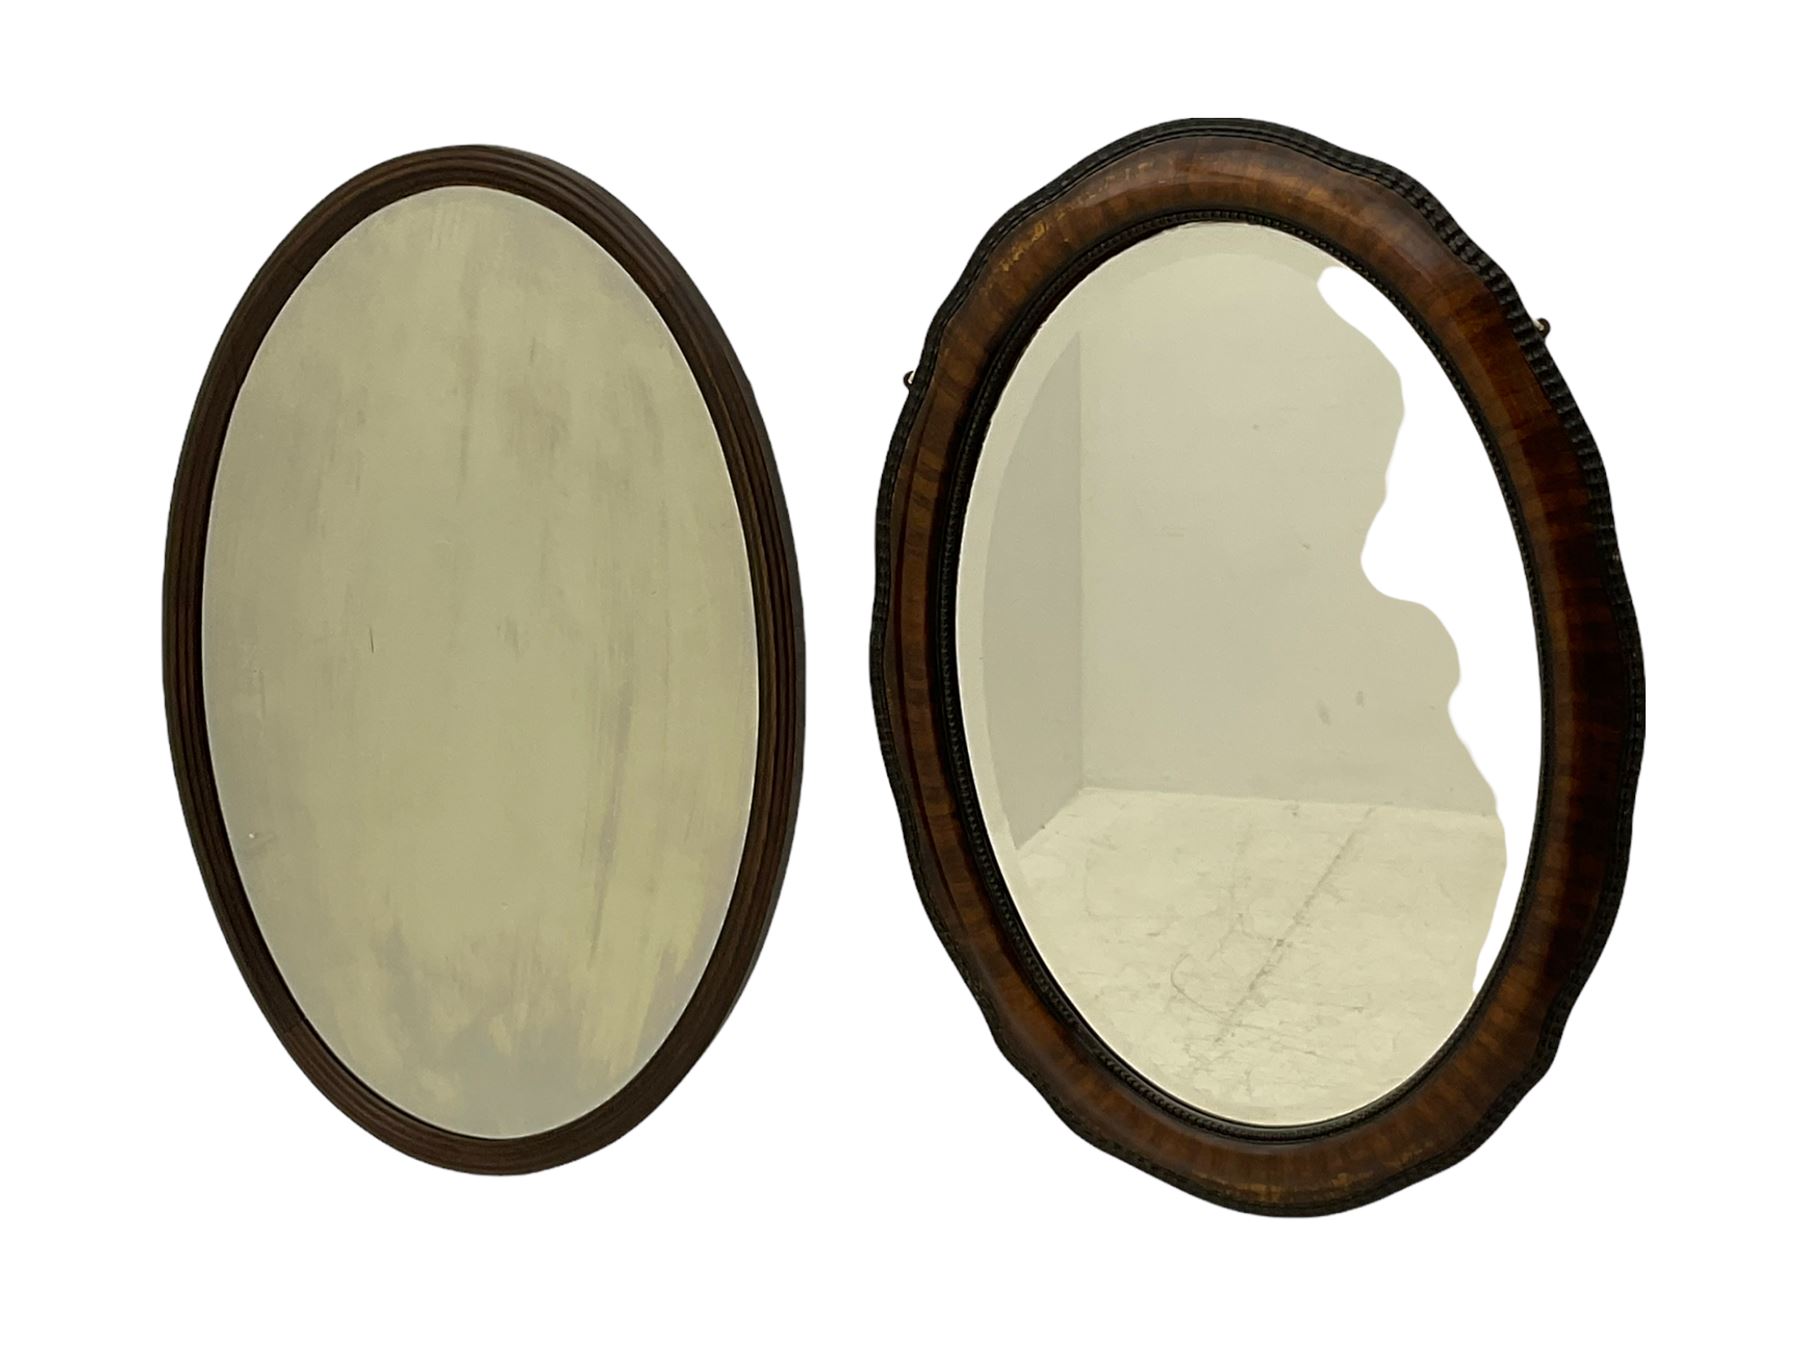 Two oval wall mirrors - Image 12 of 13